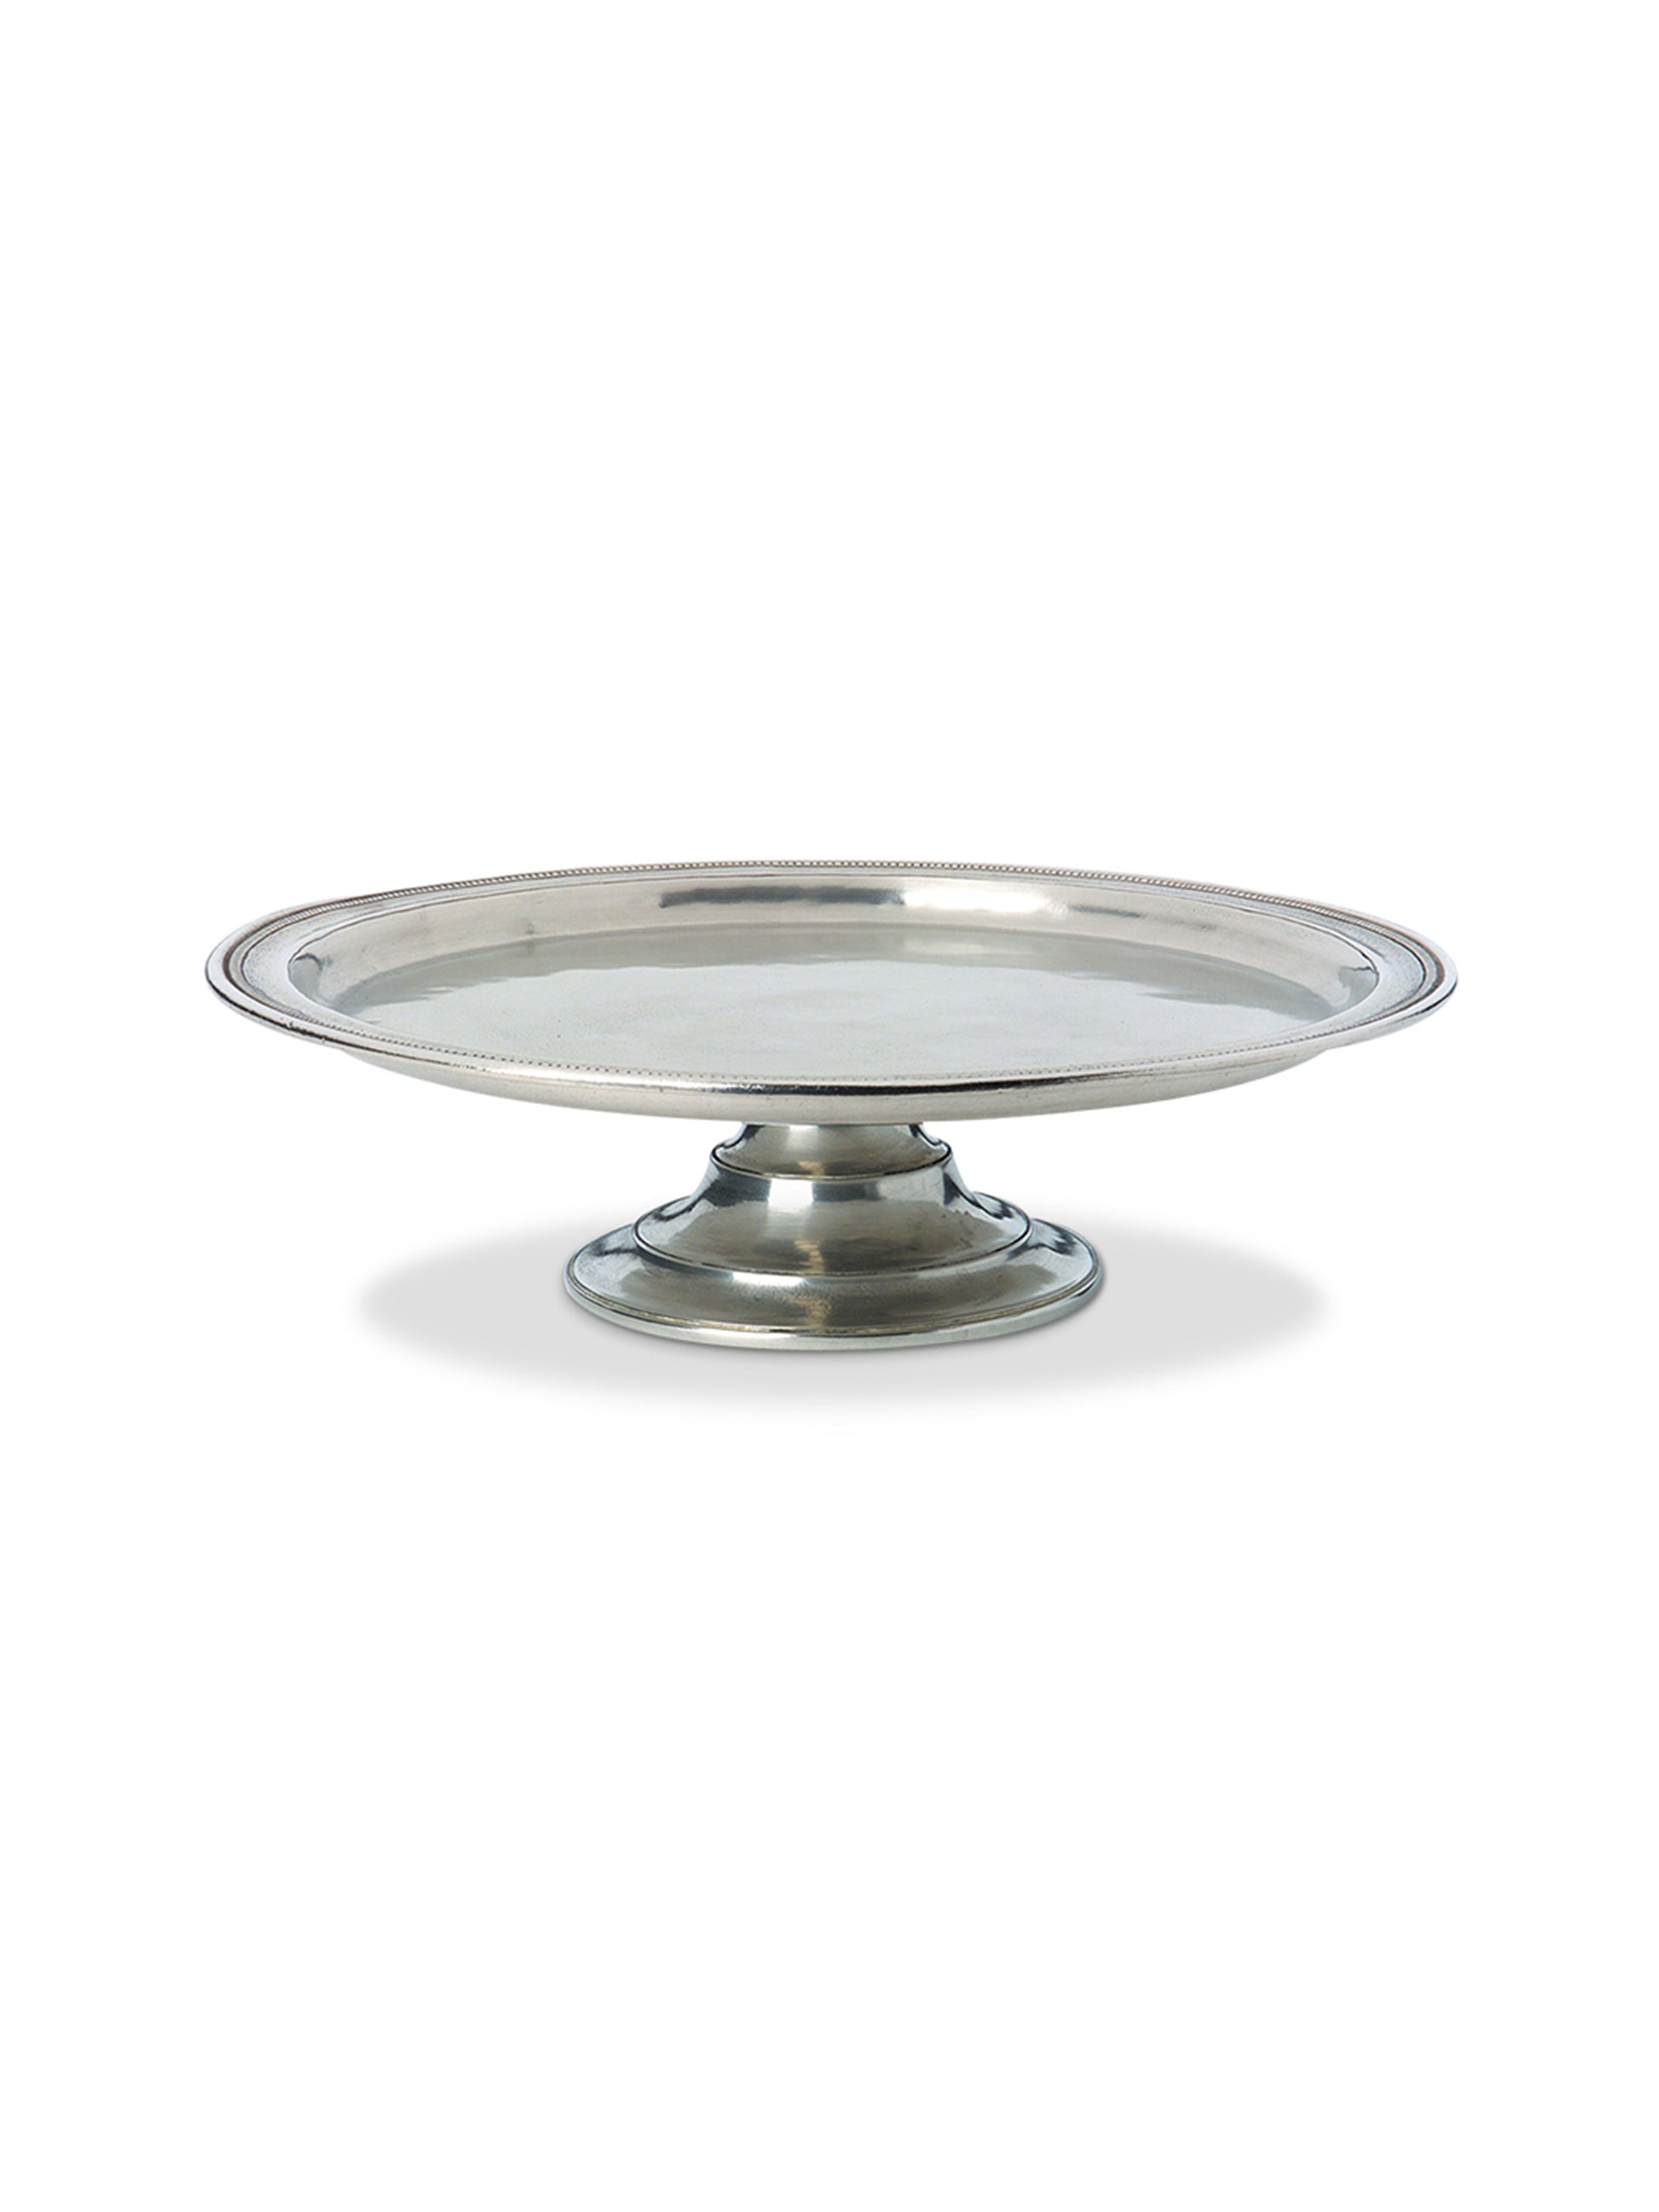 MATCH Pewter Toscana Pie Plate Weston Table